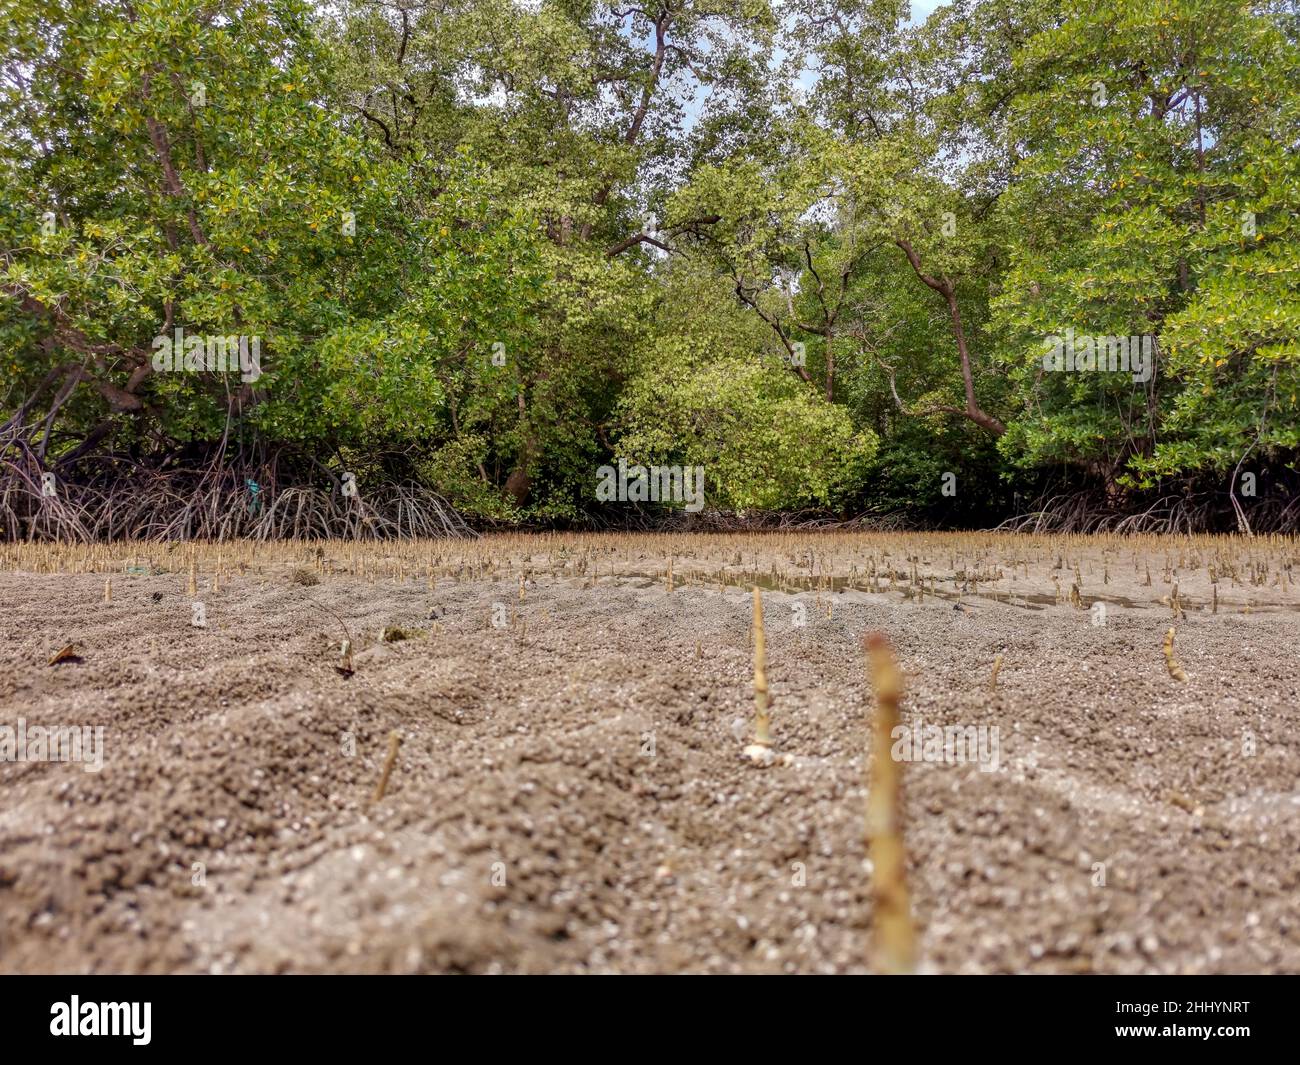 Low angle view of mangrove trees roots, pneumatophores, aerial roots, special roots for breathing of mangrove apple, cork tree in tropical mangrove fo Stock Photo